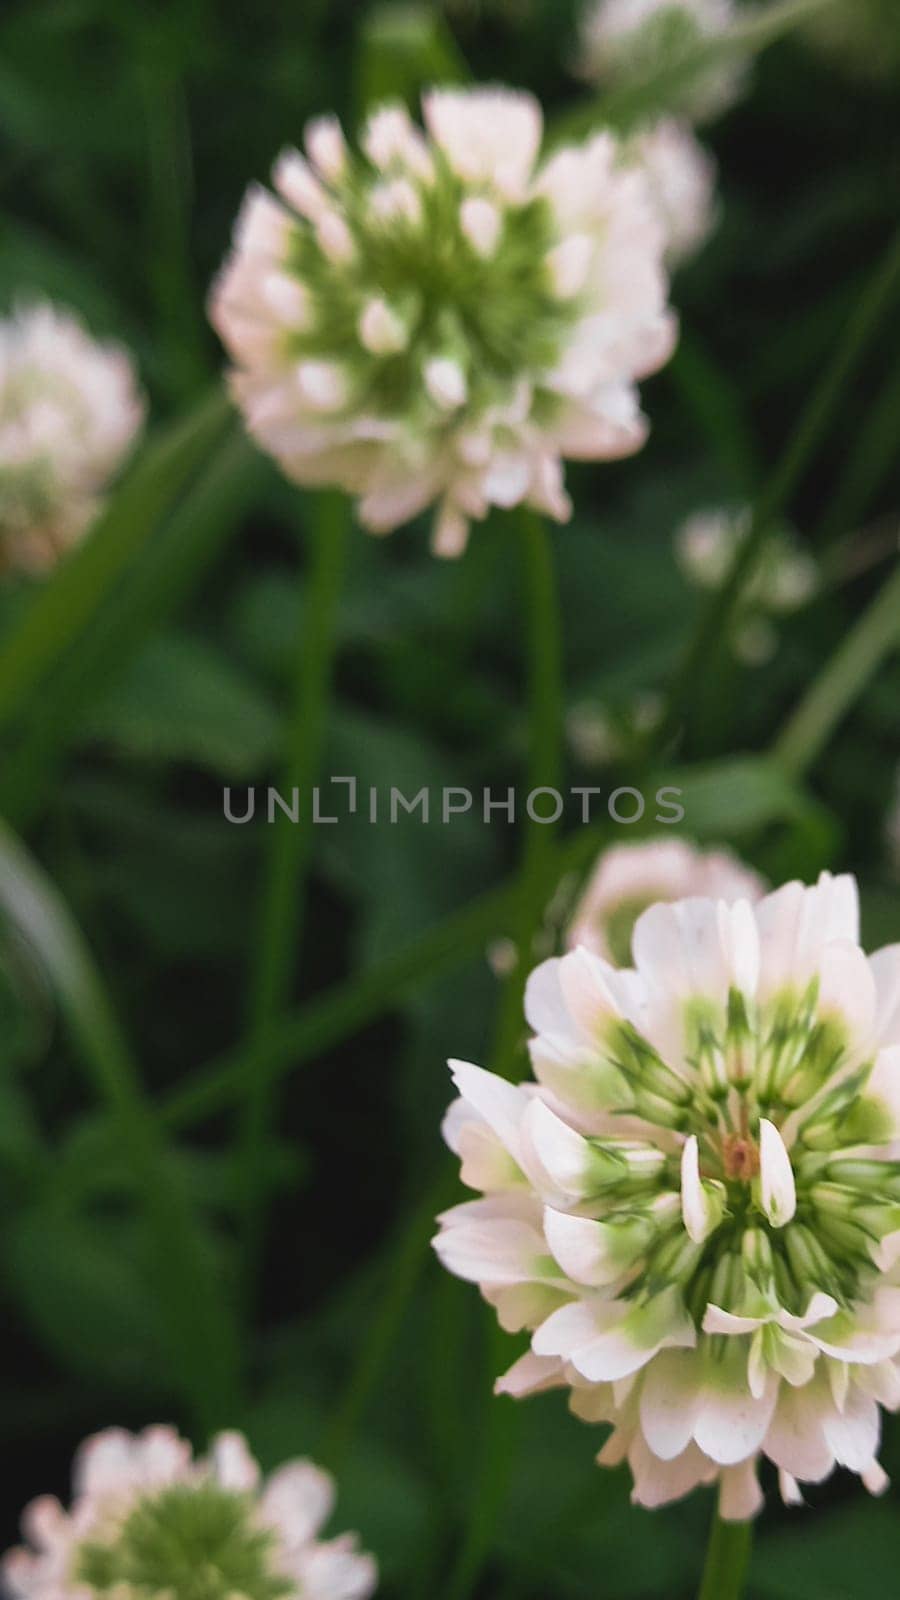 White clower in meadow. Natural green background. One single flower of white clower trifolium repens in a lawn. High quality photo